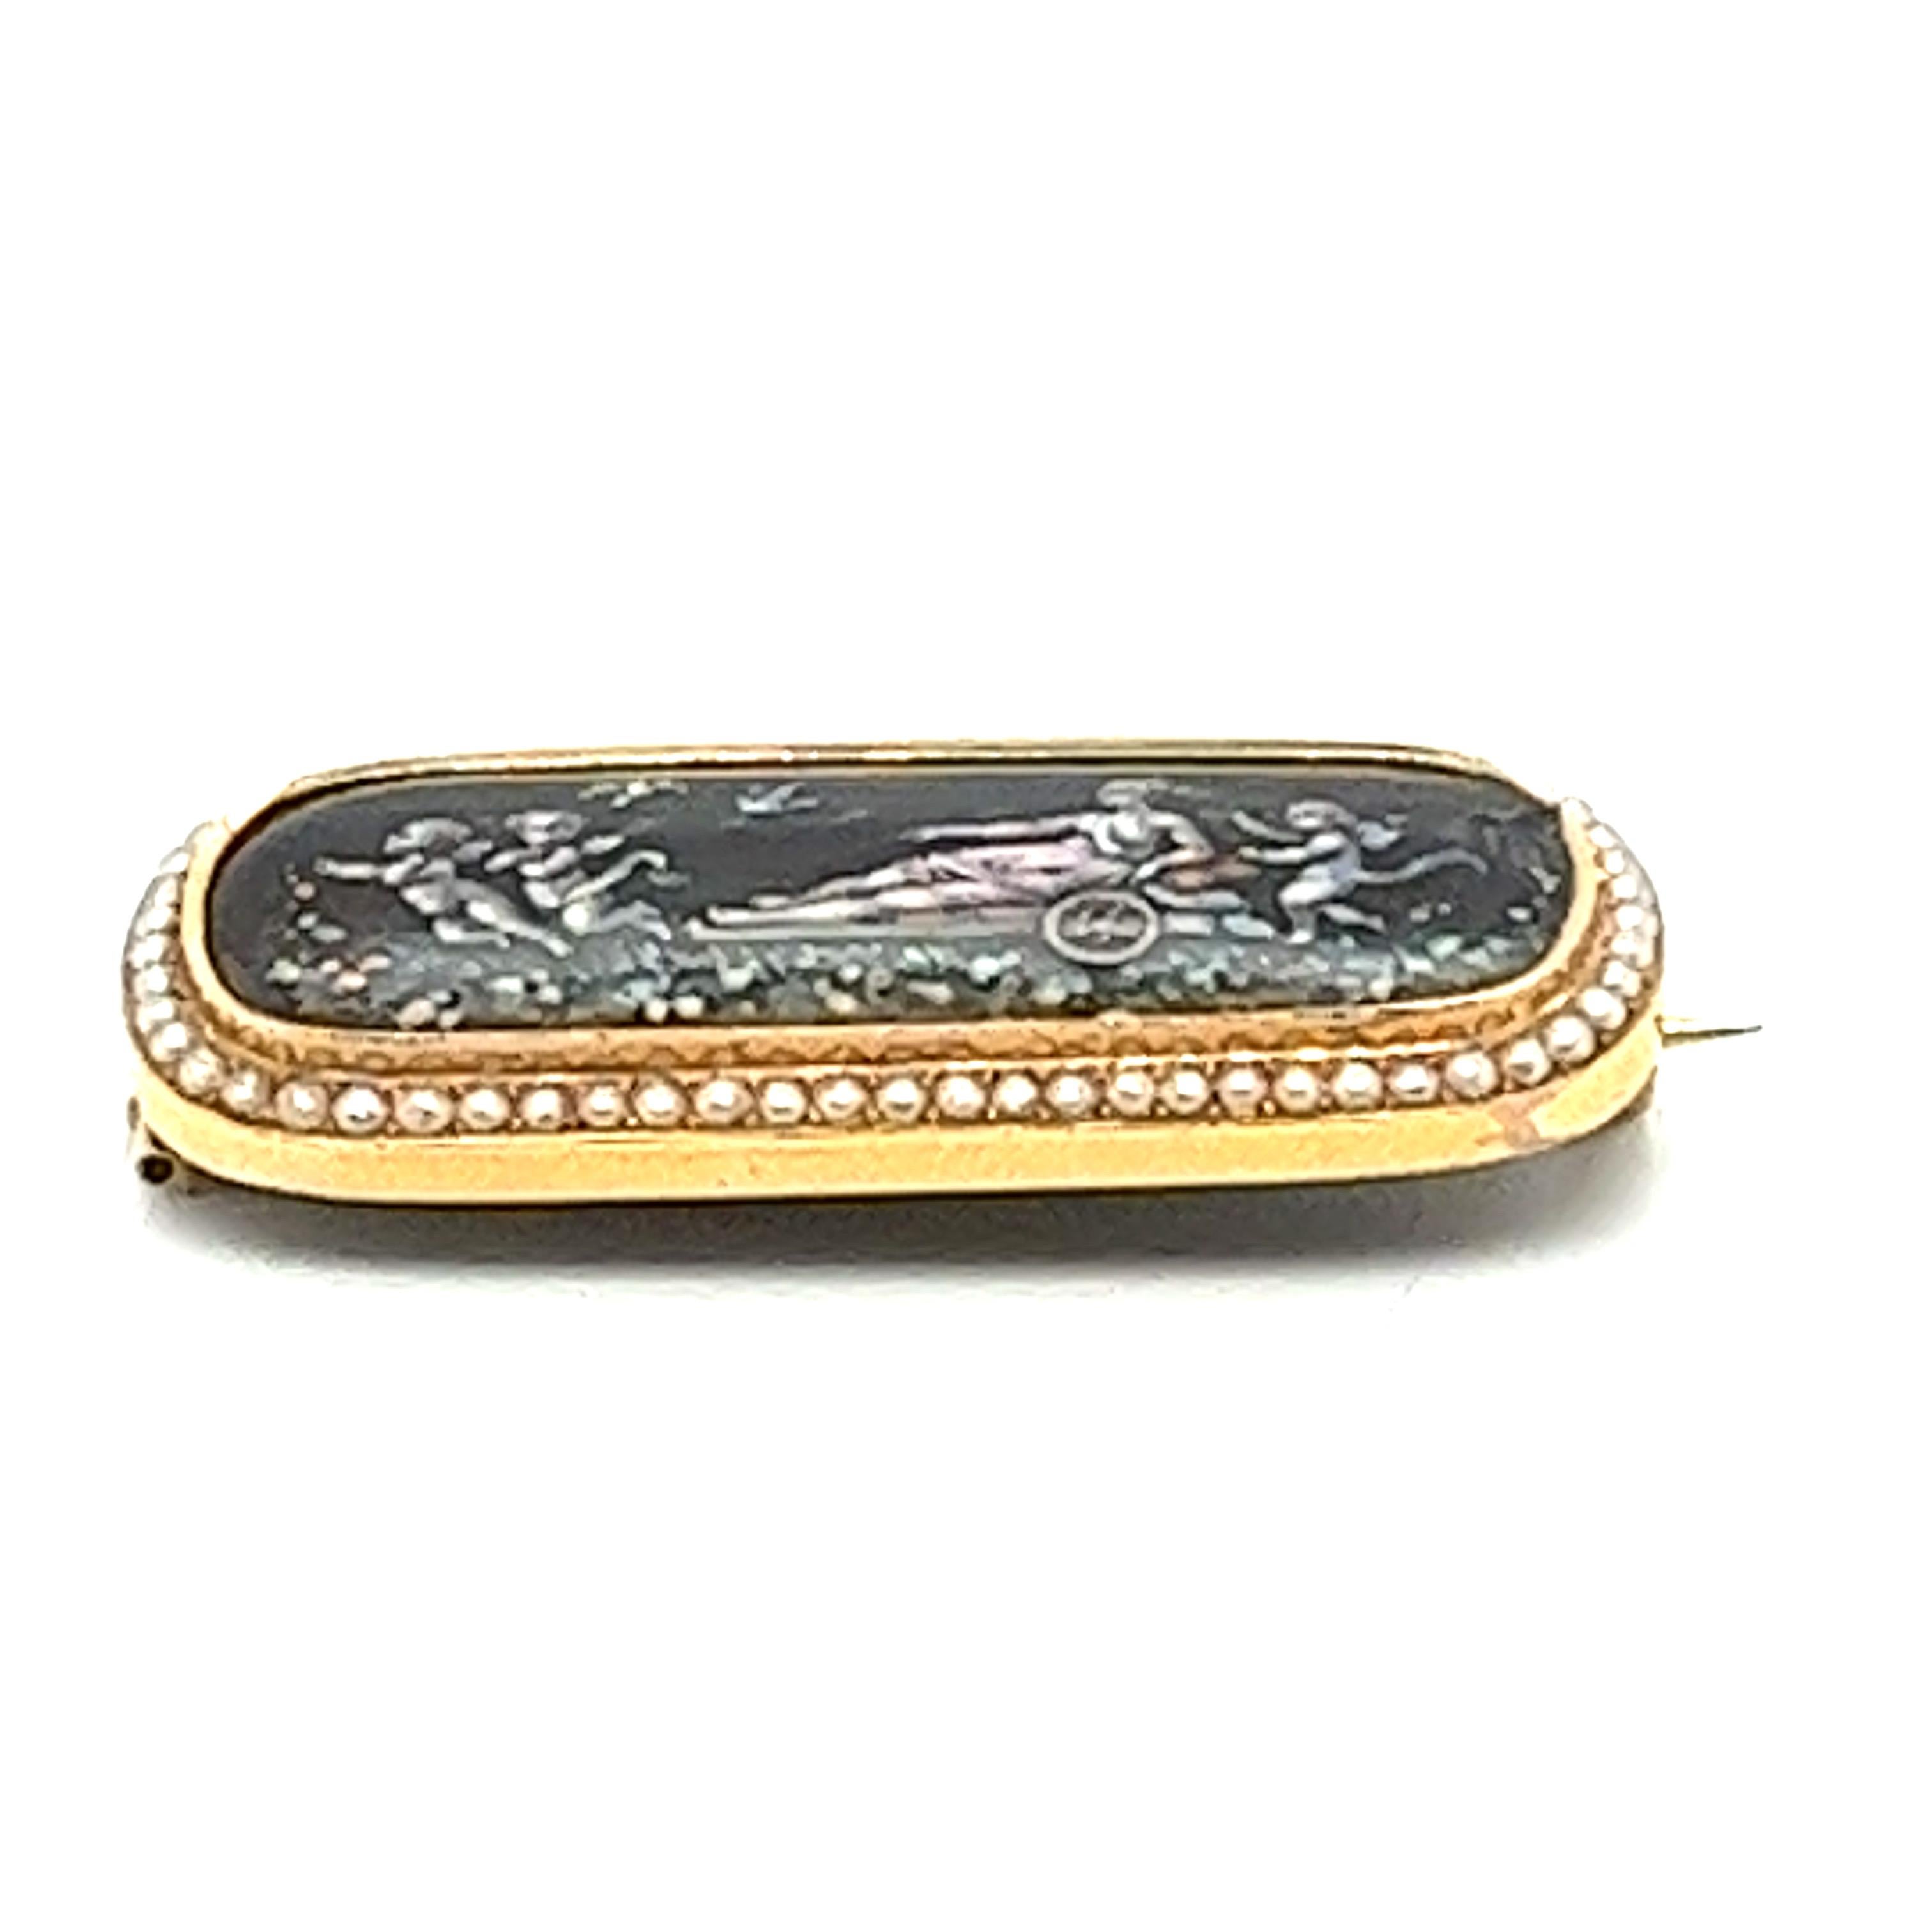 Antique Brooch with Enameled - Triumph of Love - Moulinie & Legrandroy, Geneve For Sale 3